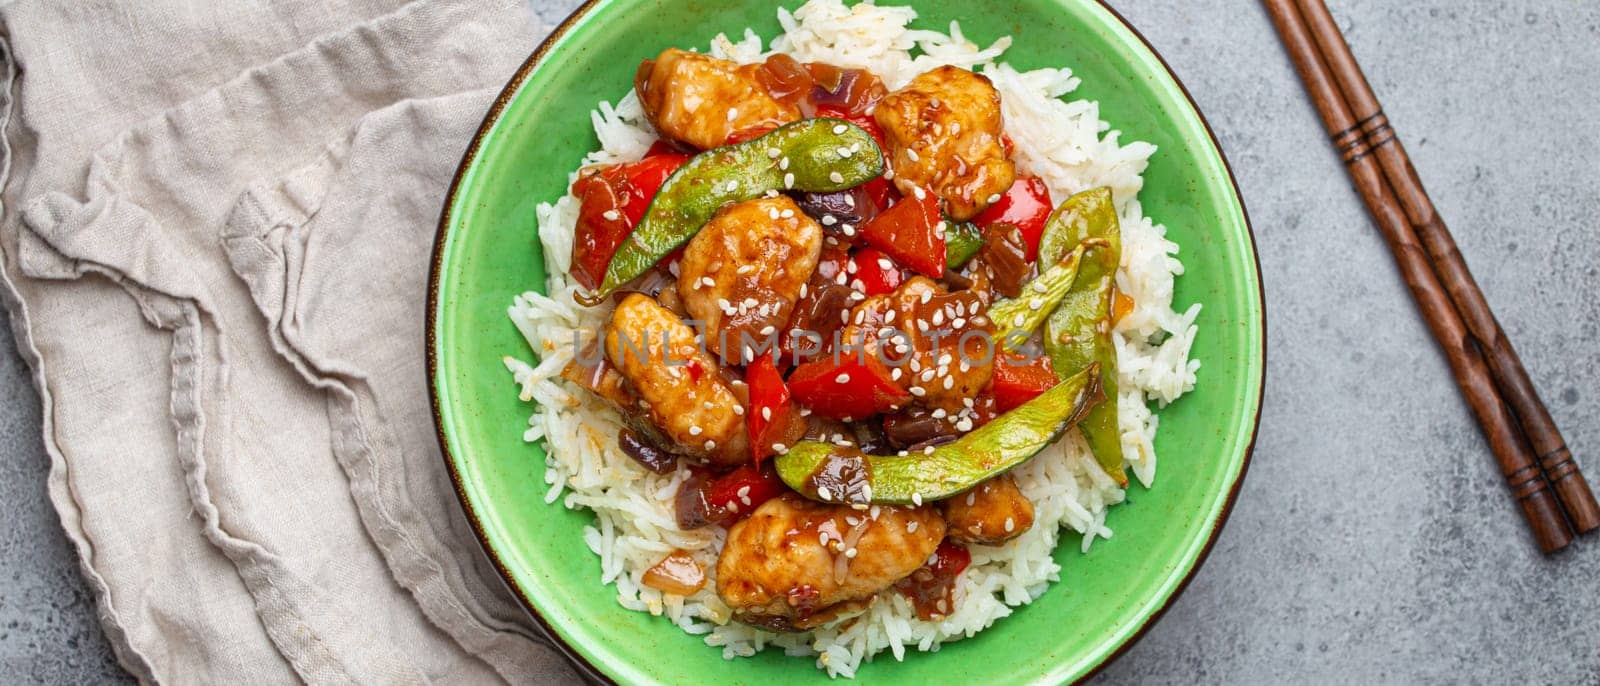 Asian sweet and sour sticky chicken with vegetables stir-fry and rice in ceramic bowl with chopsticks top view, gray rustic stone background, traditional Asian dish by its_al_dente